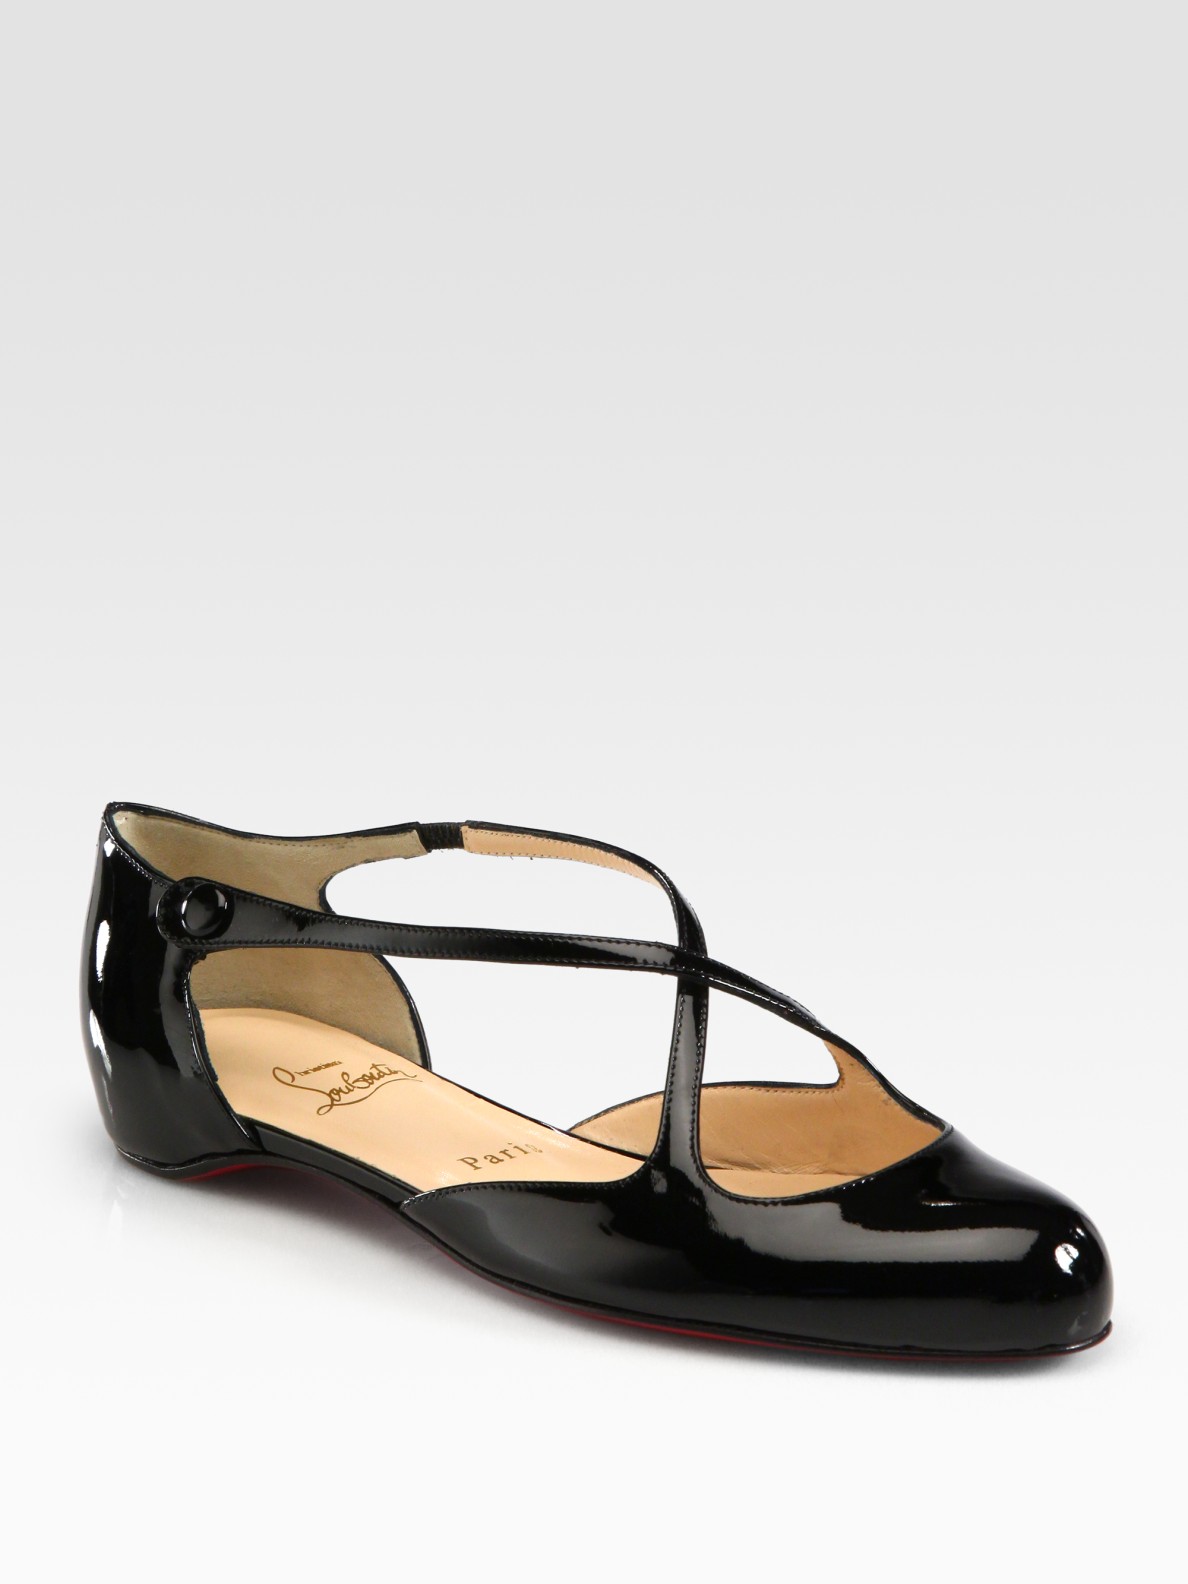 christian louboutin patent leather Mary Jane wedges Black snap ...